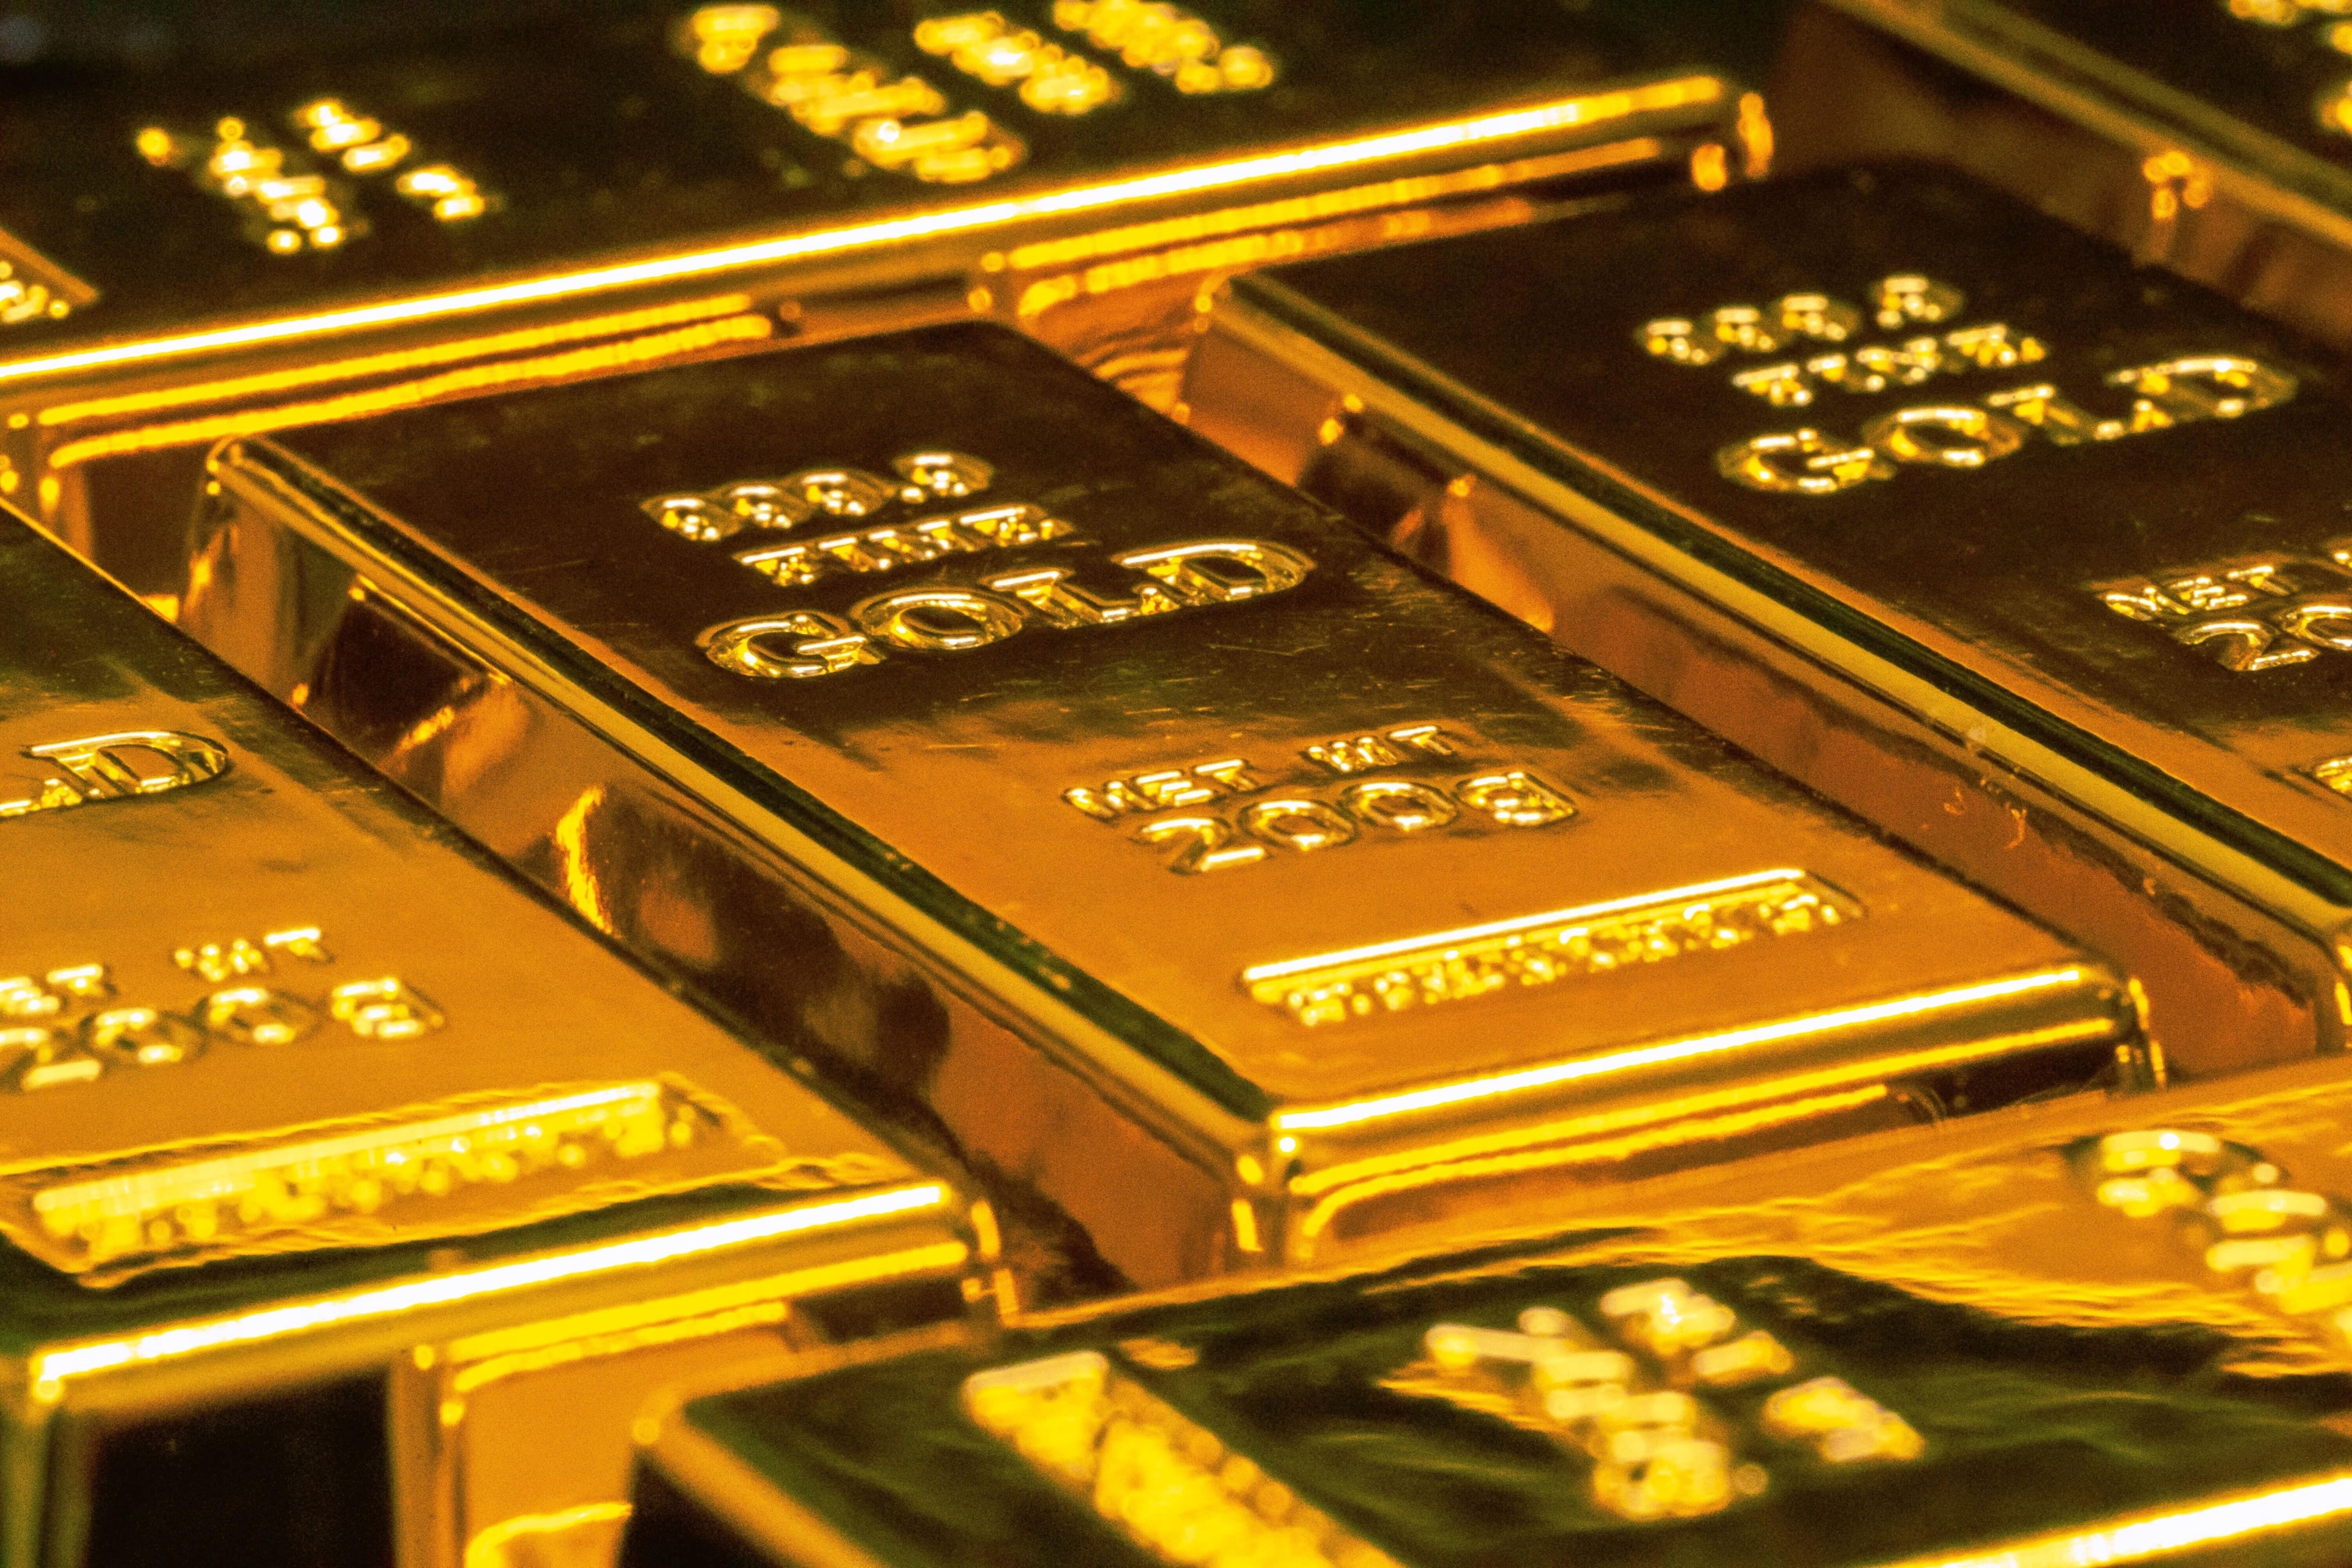 Gold prices climbed on March 223 as demand for safe-haven metal rose amid rising inflation and ongoing Ukraine war. However, a firmer dollar and high bond yields capped the gains of the yellow metal.